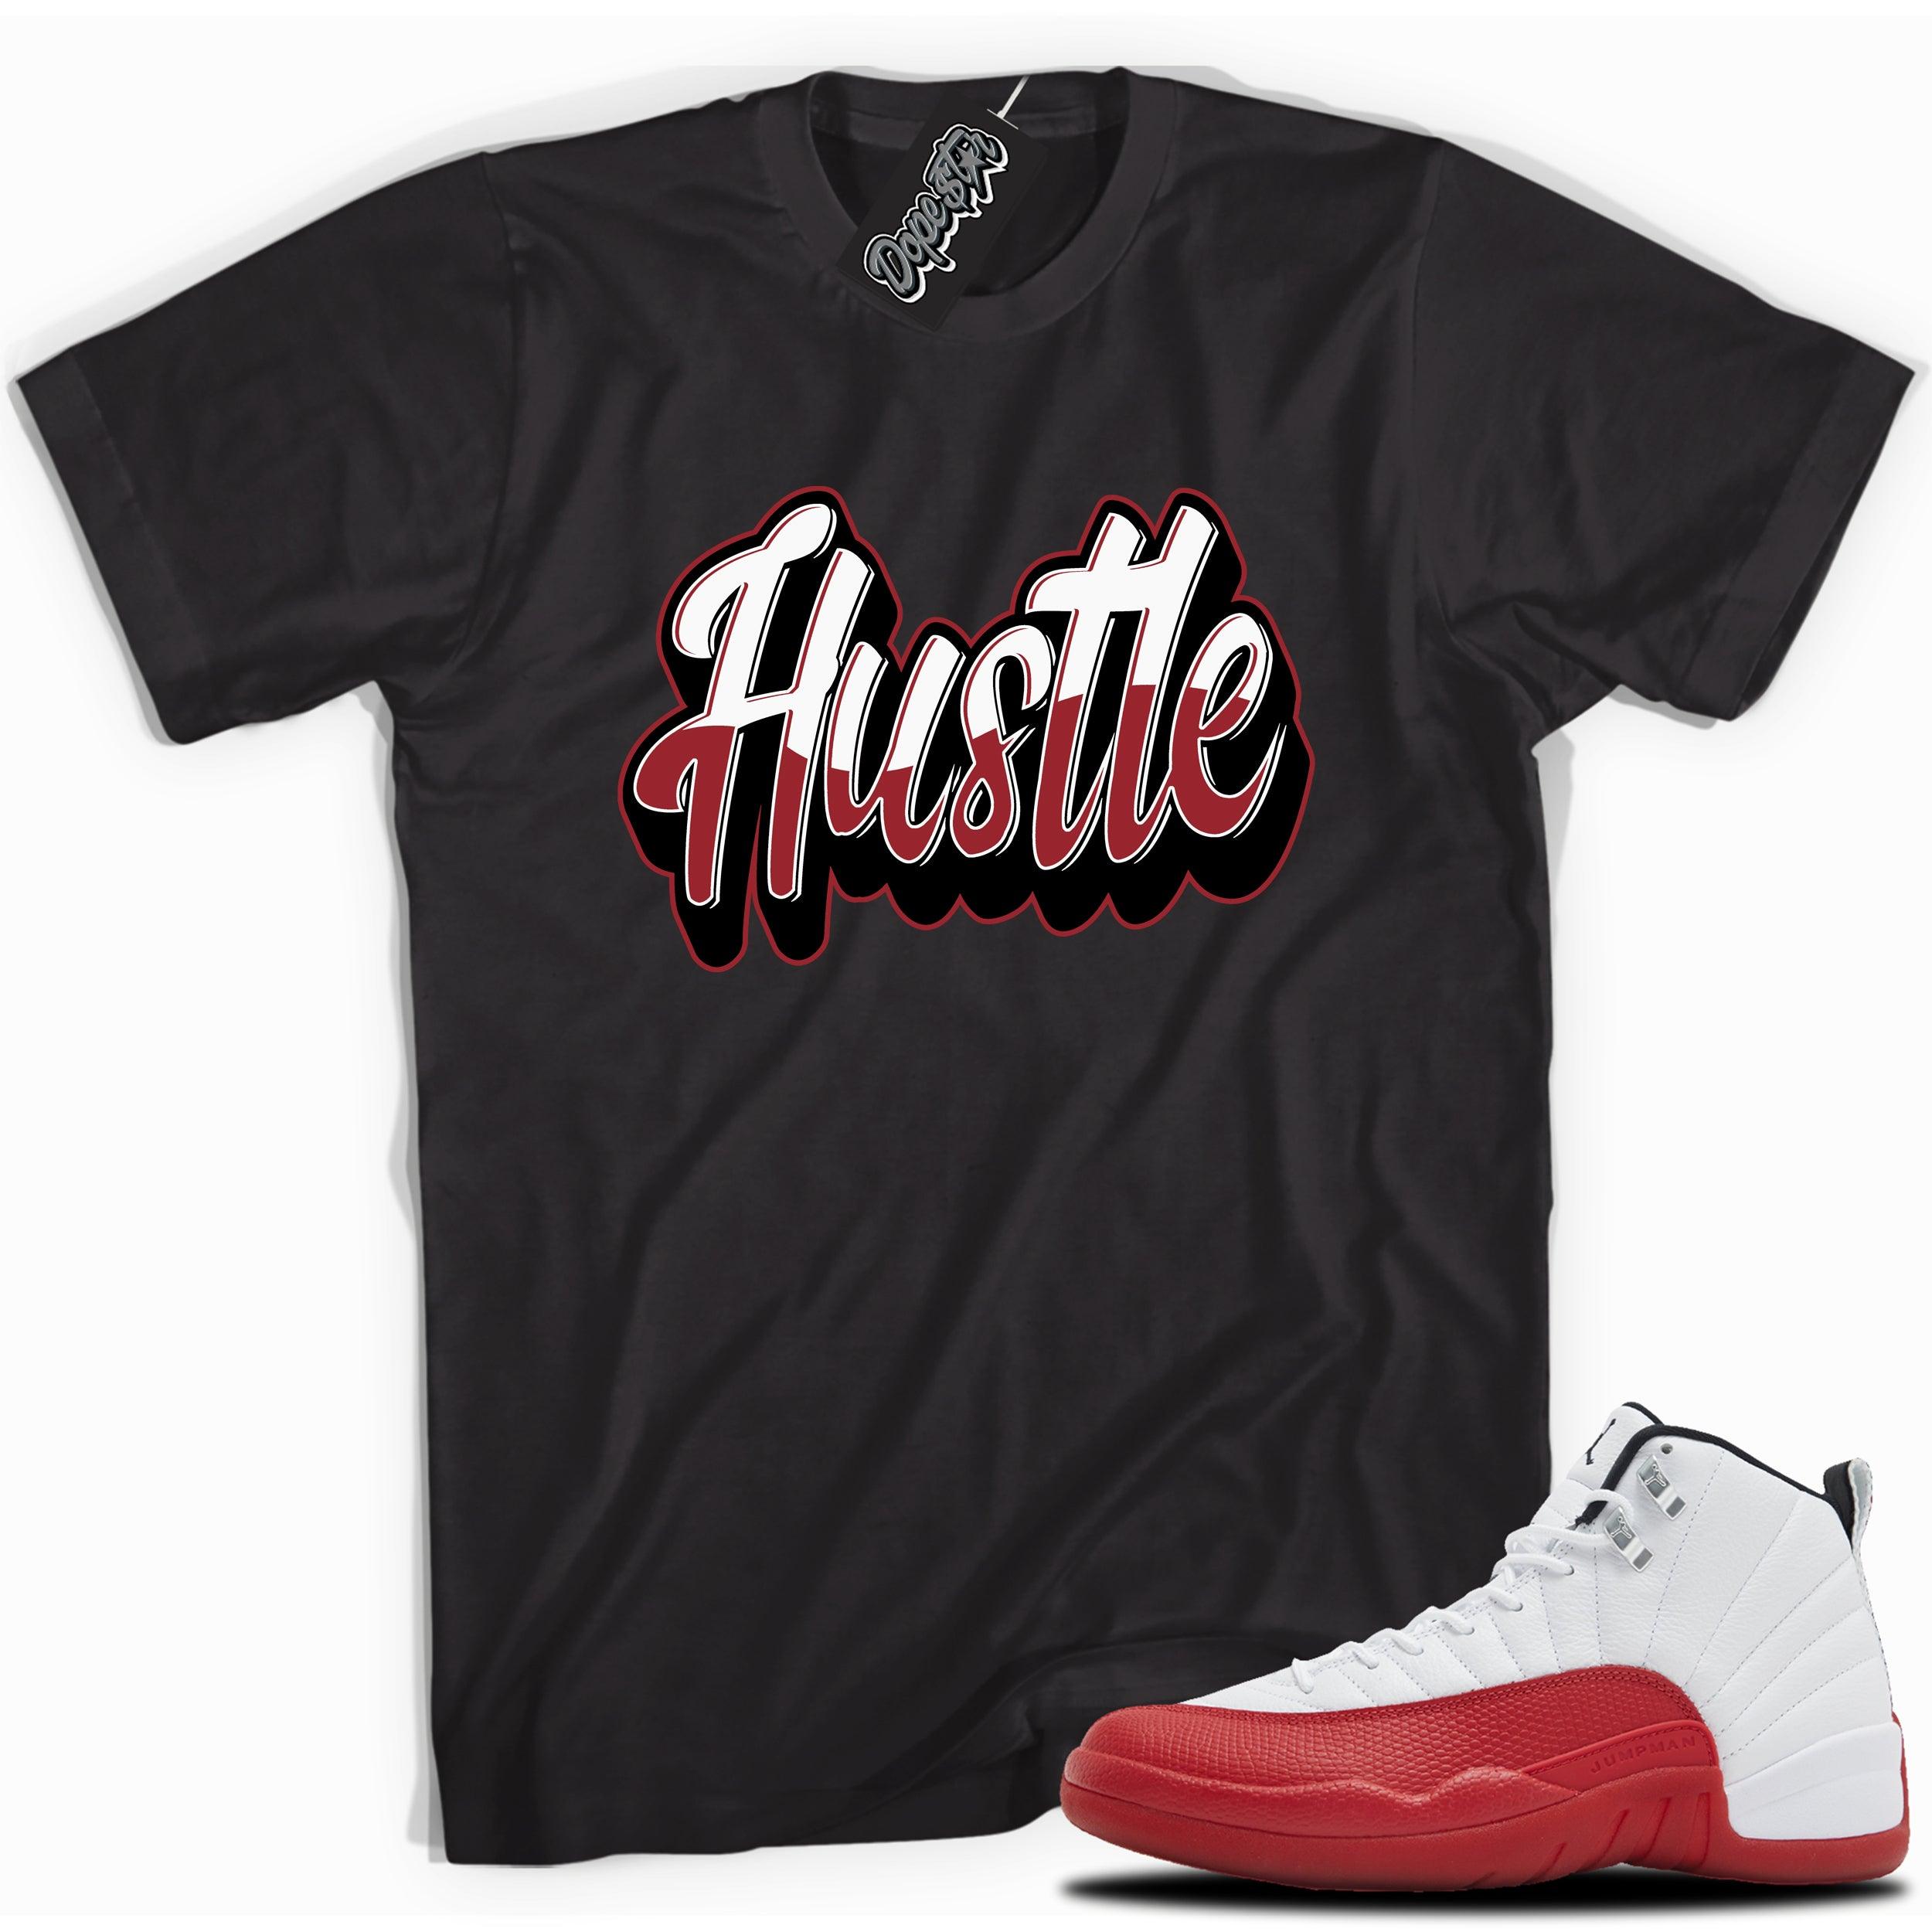 Cool Black graphic tee with “ HUSTLE 2 ” print, that perfectly matches Air Jordan 12 Retro Cherry Red 2023 red and white sneakers 